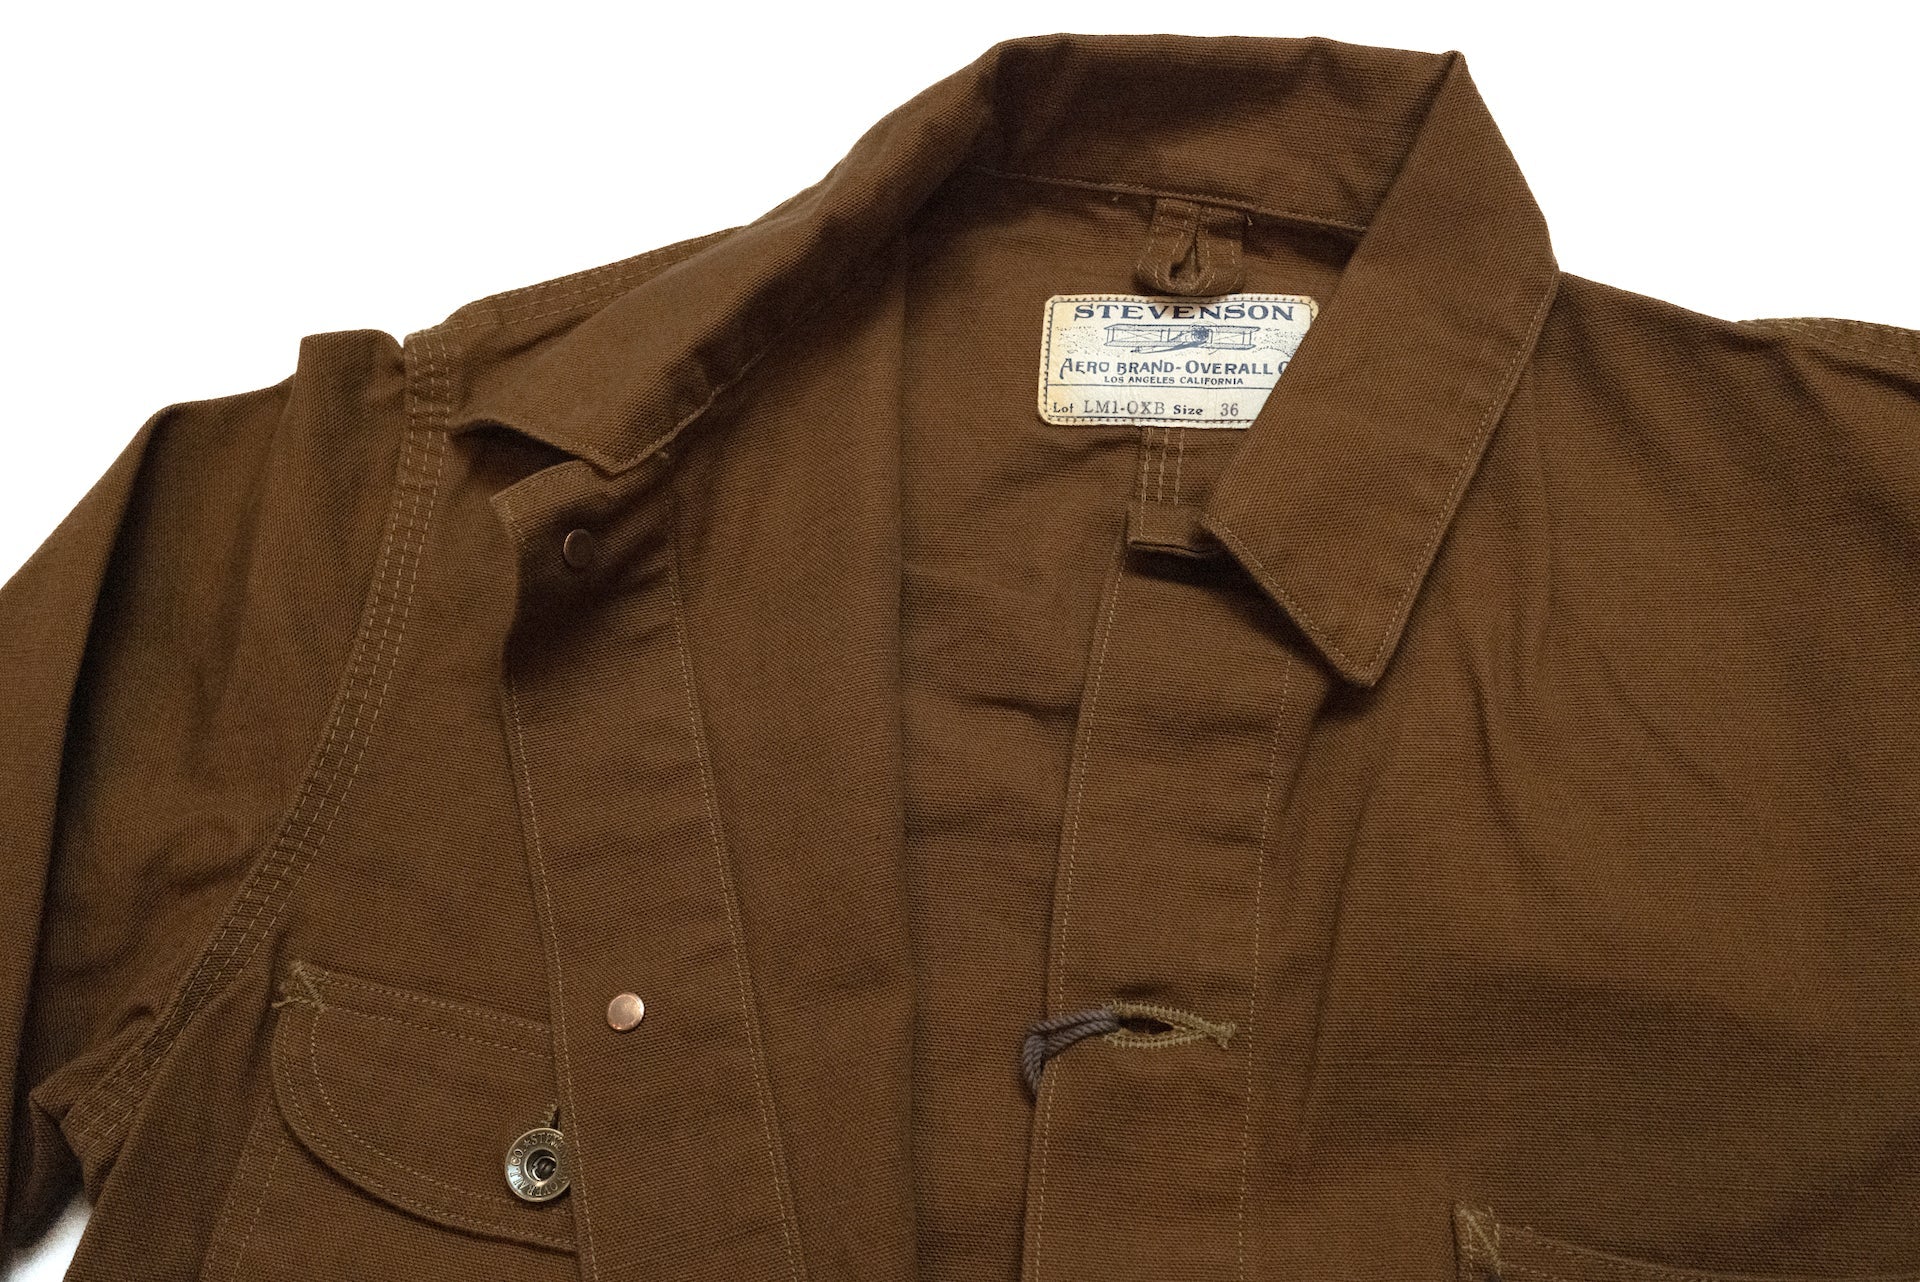 Stevenson Overall Co. 10.6oz 'Linesman' Duck Canvas Coverall (Brown)